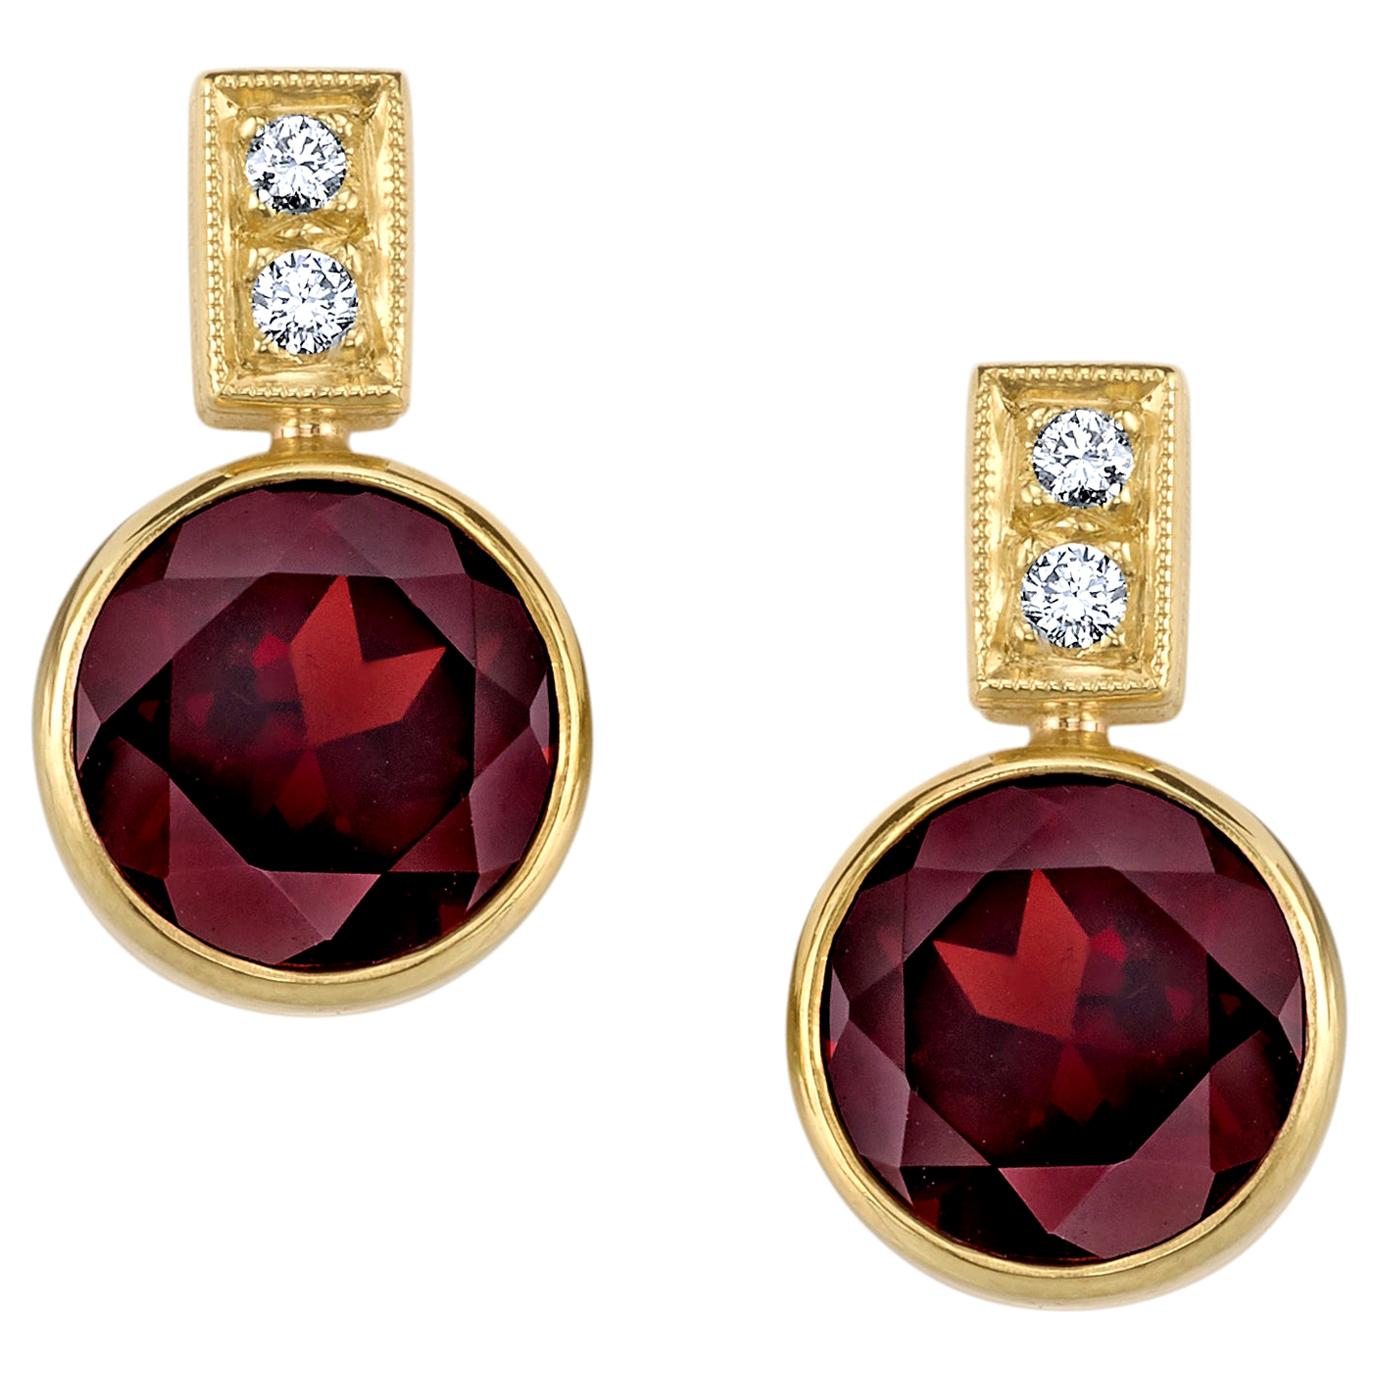 Red Garnet and Diamond Drop Earrings in 18k Yellow Gold, 7.90 Carats Total